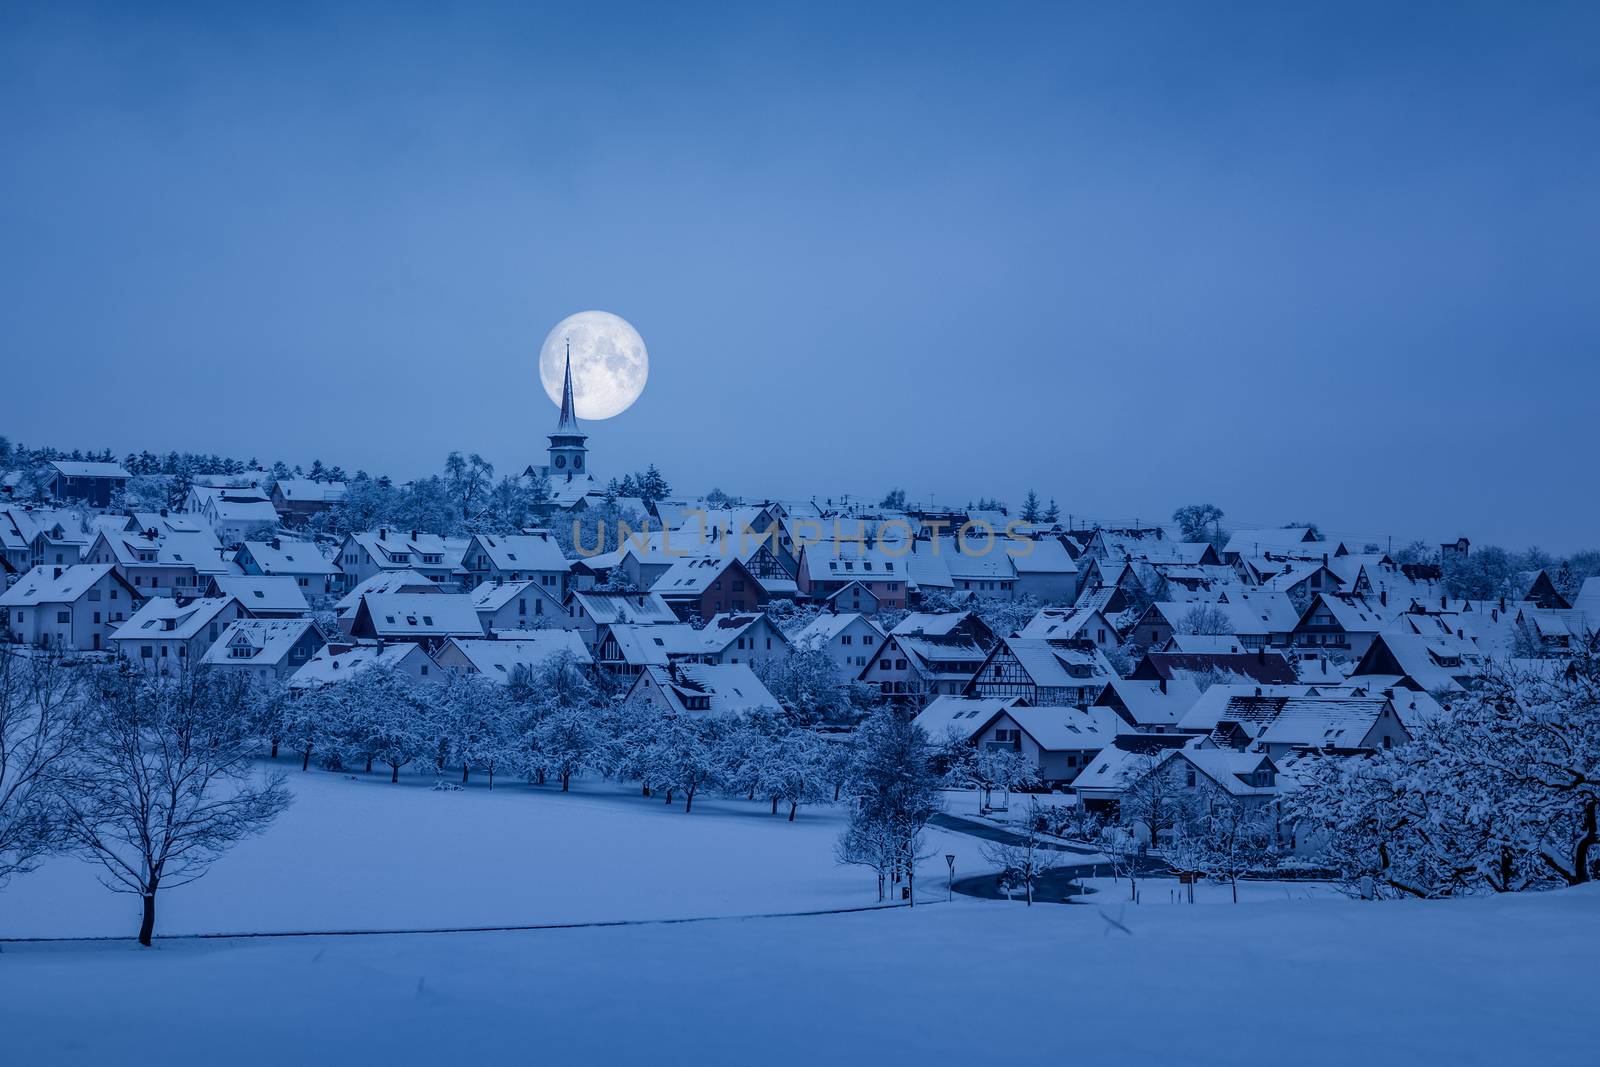 Holzbronn Germany winter scenery by night by magann